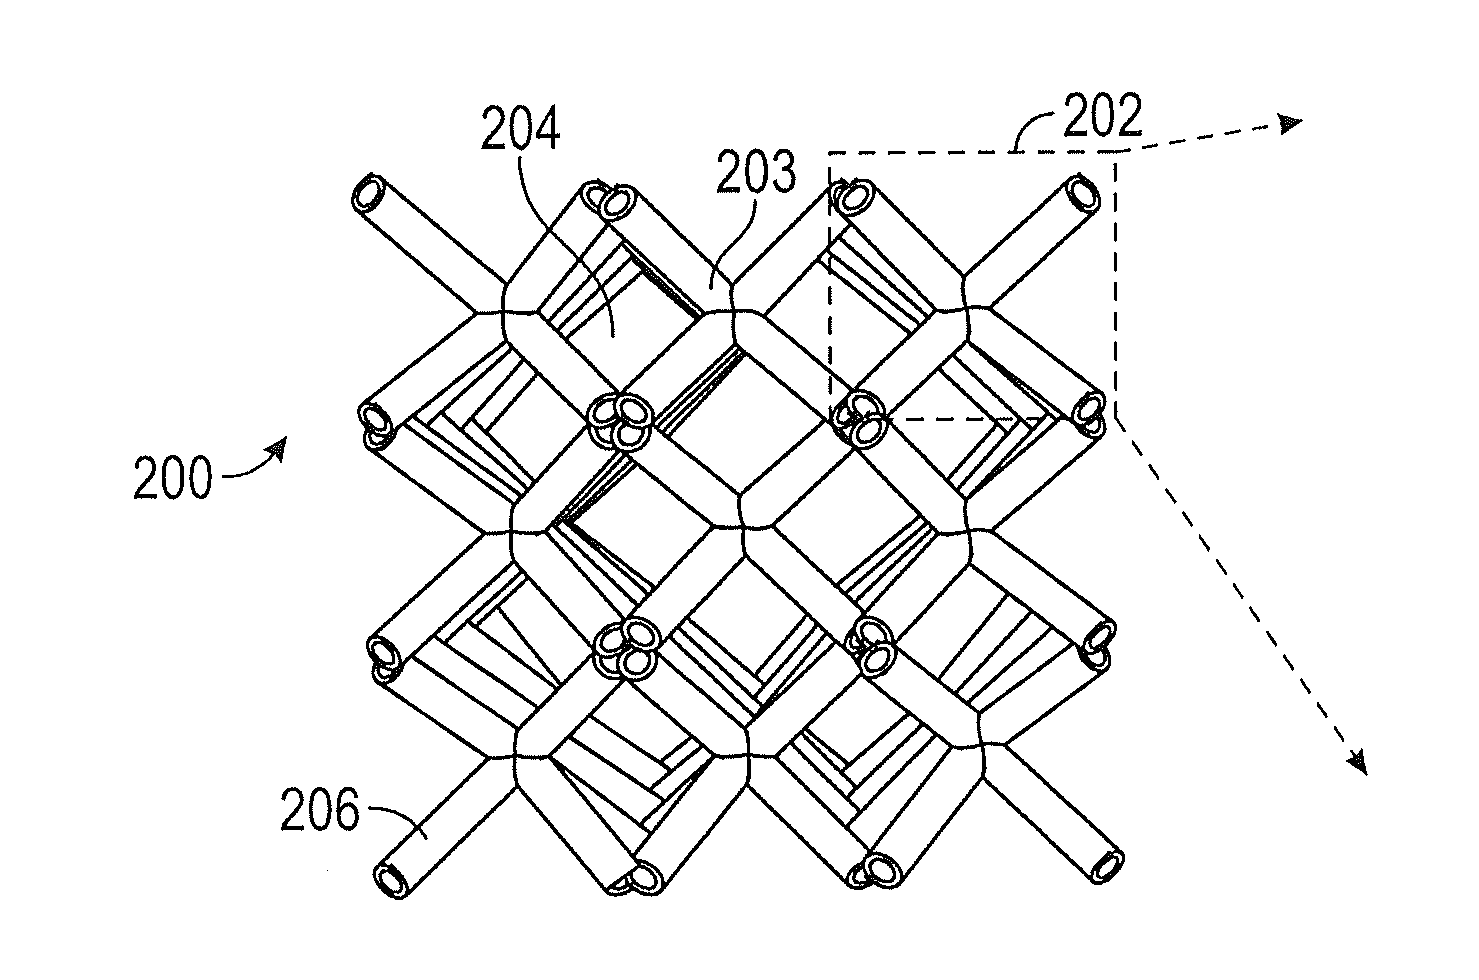 Periodic structured composite and articles therefrom